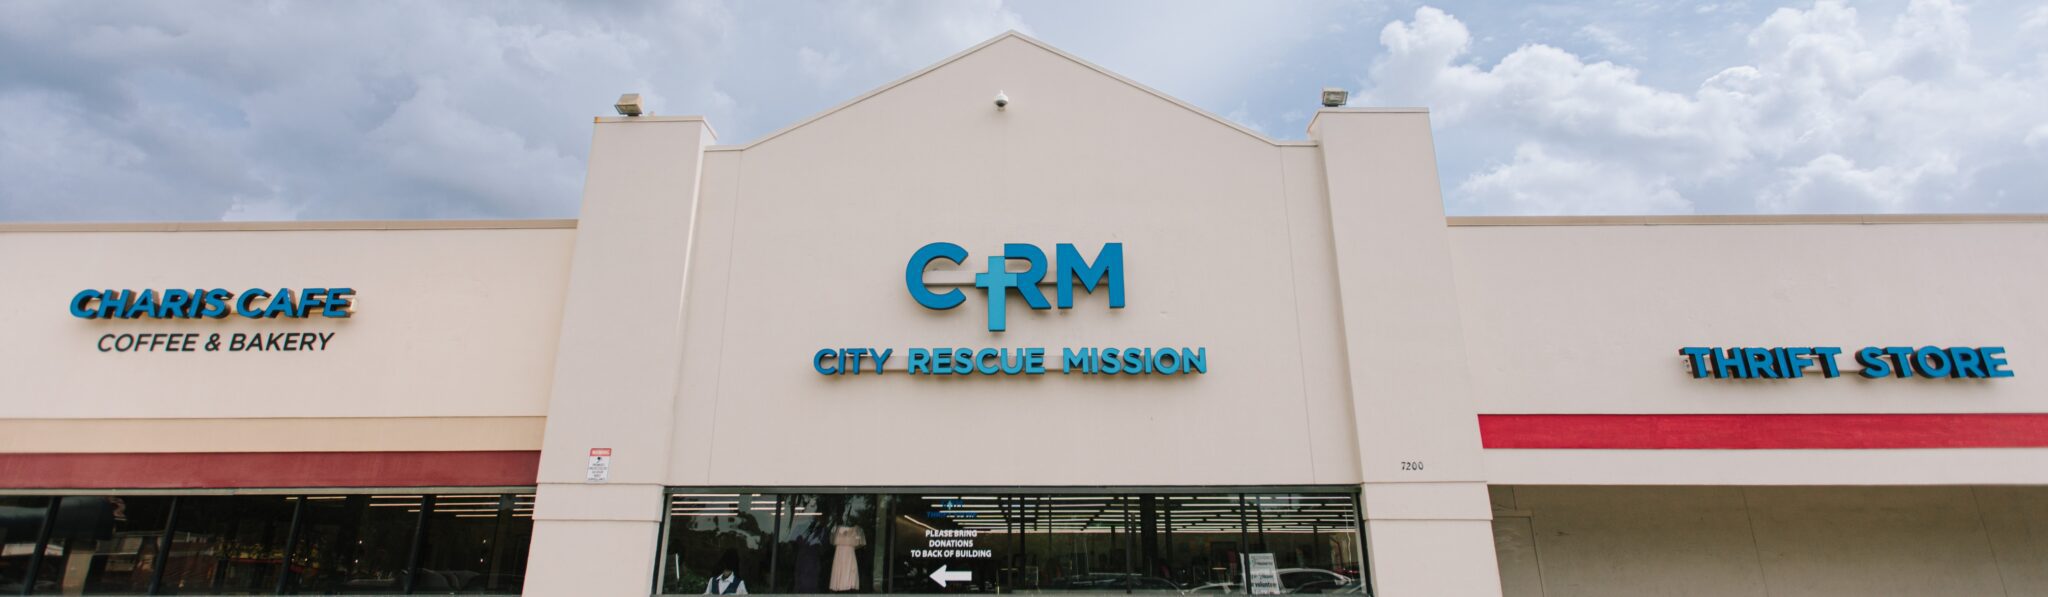 Thrift Stores Near Me - City Rescue Mission